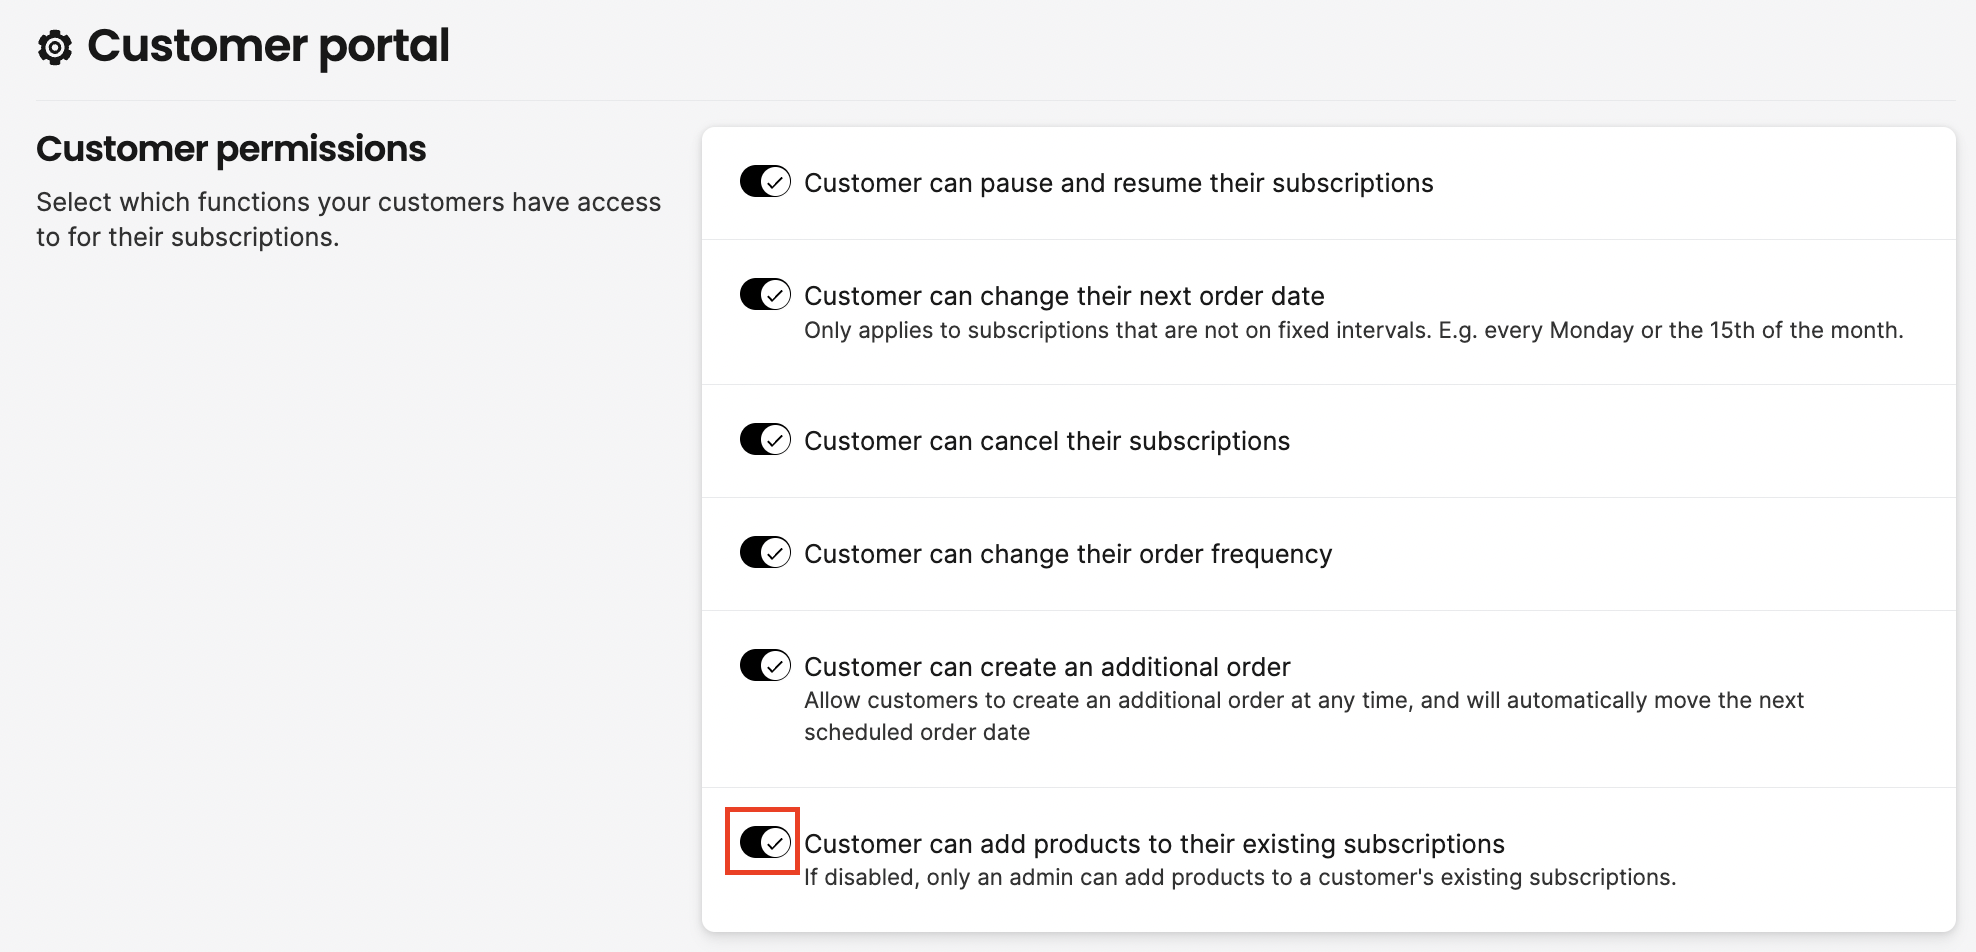 Customer can add products to their existing subscription